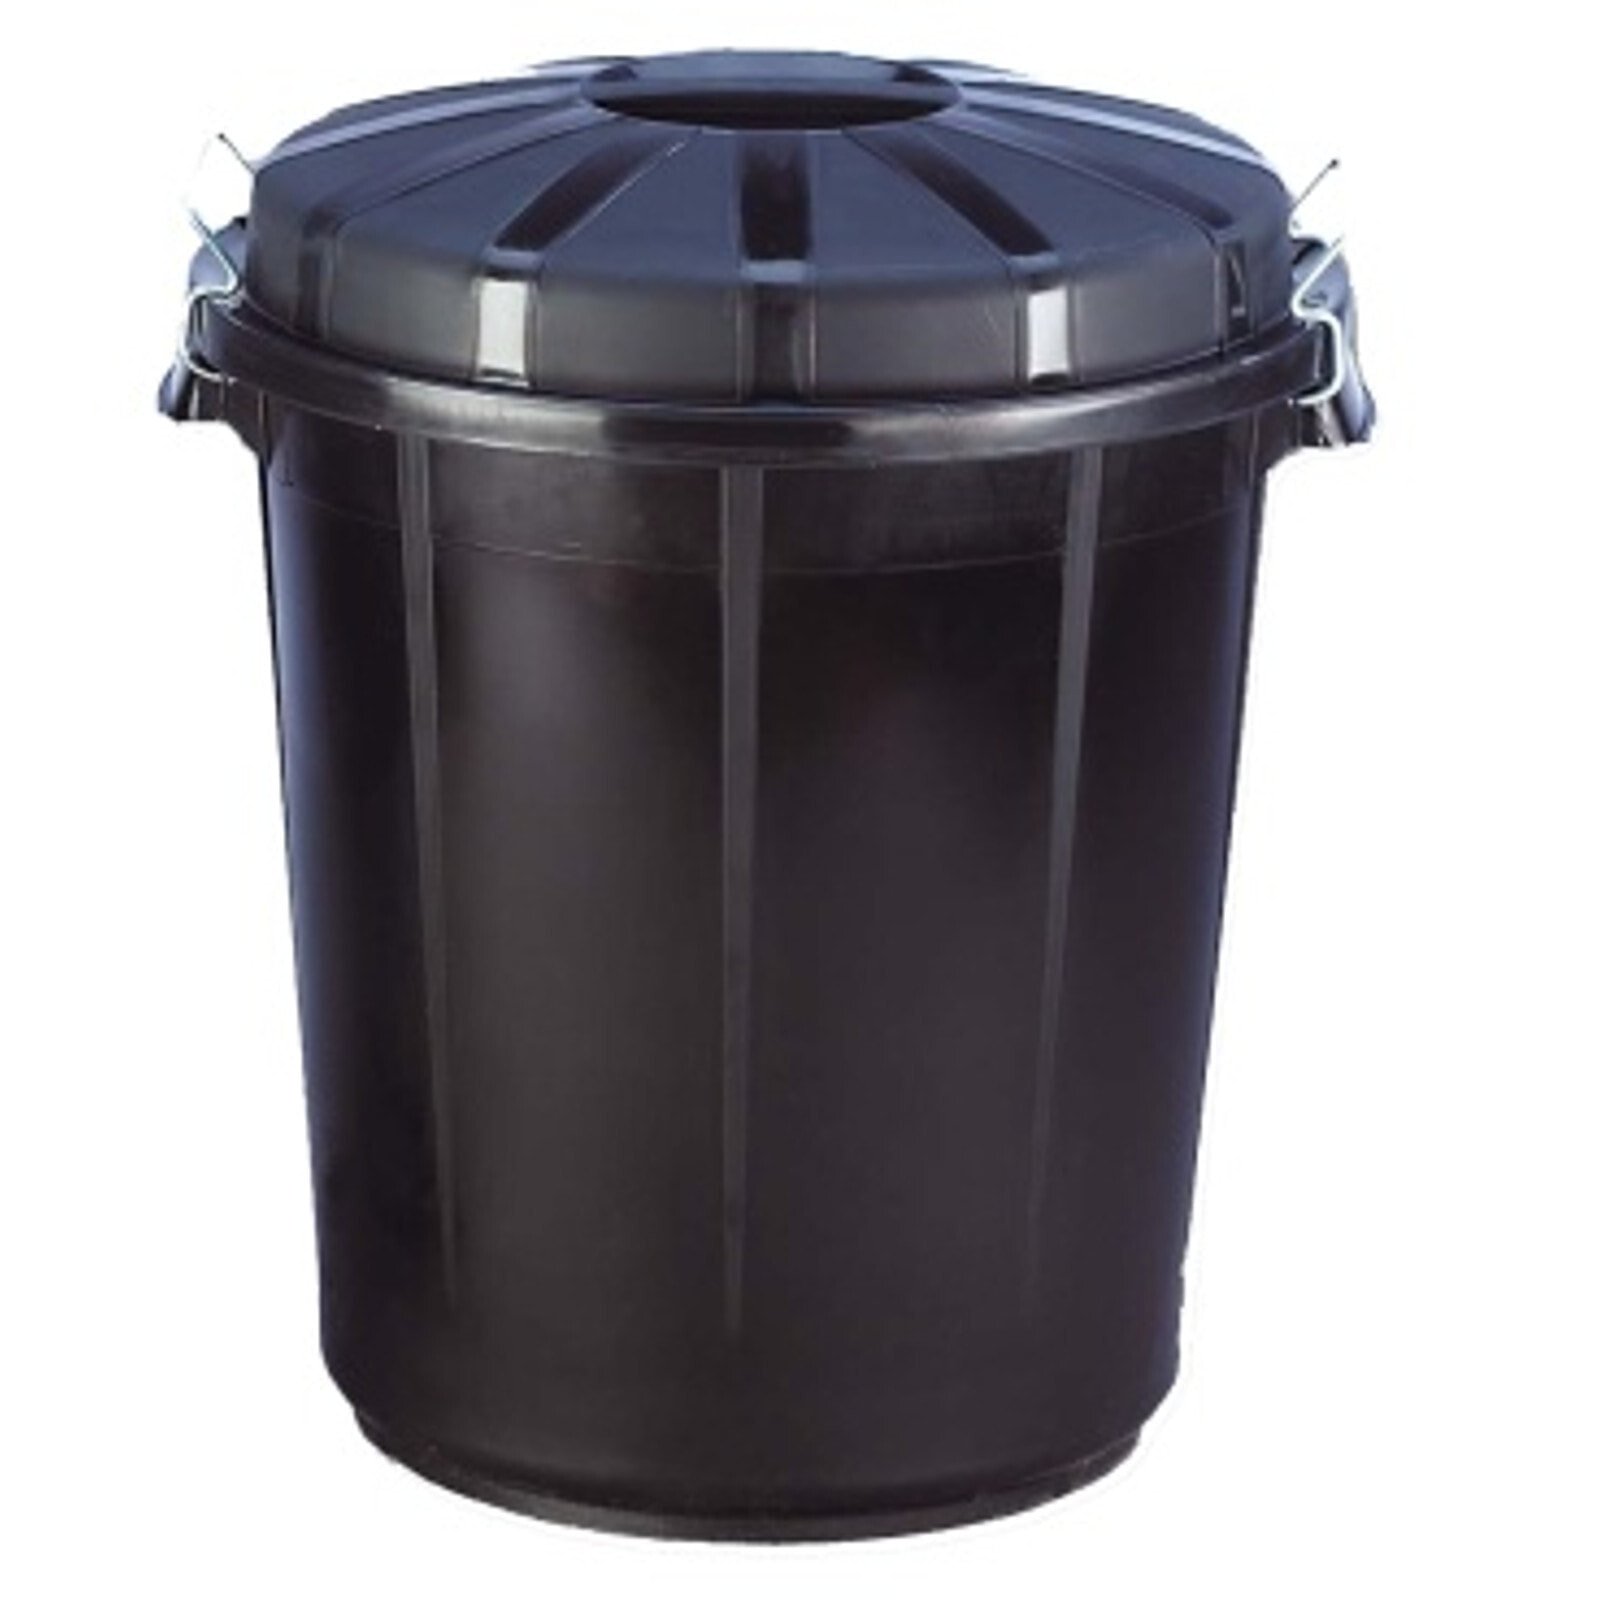 Universal waste bin container with a lid, round 70L black